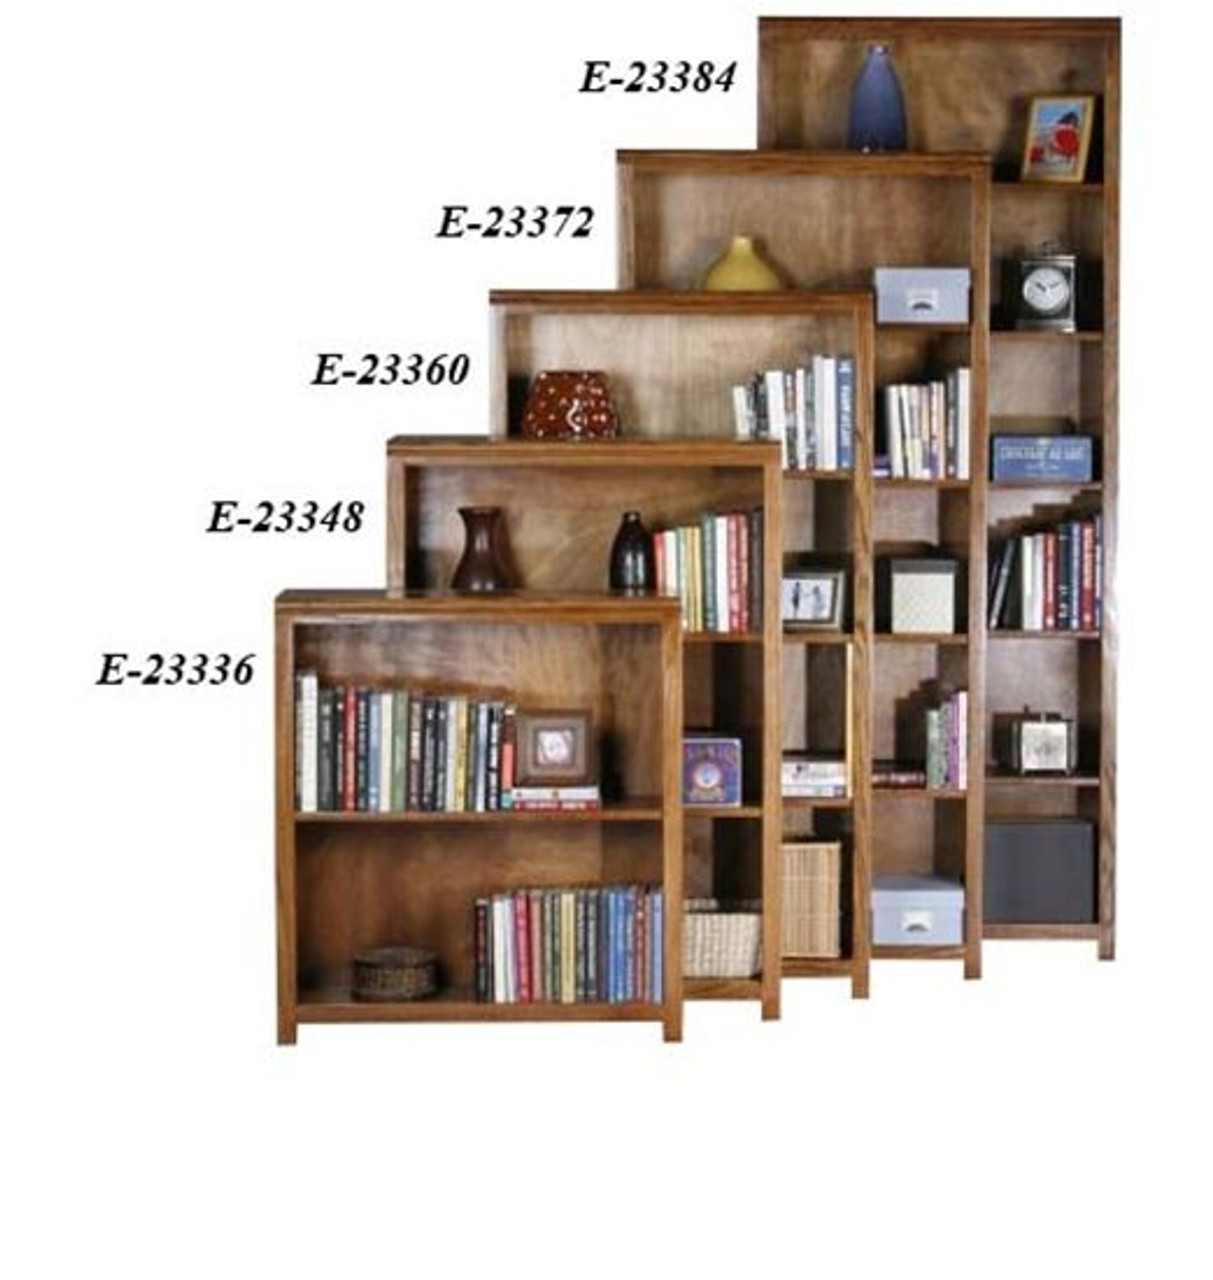 Adler 32 x 48" Bookcase Traditional Solid Wood Book Case Student College Dorm Bookcase with 2 Fixed Book Storage Shelves, Oak Stain Finishes Available, Eagle Part # E-23348